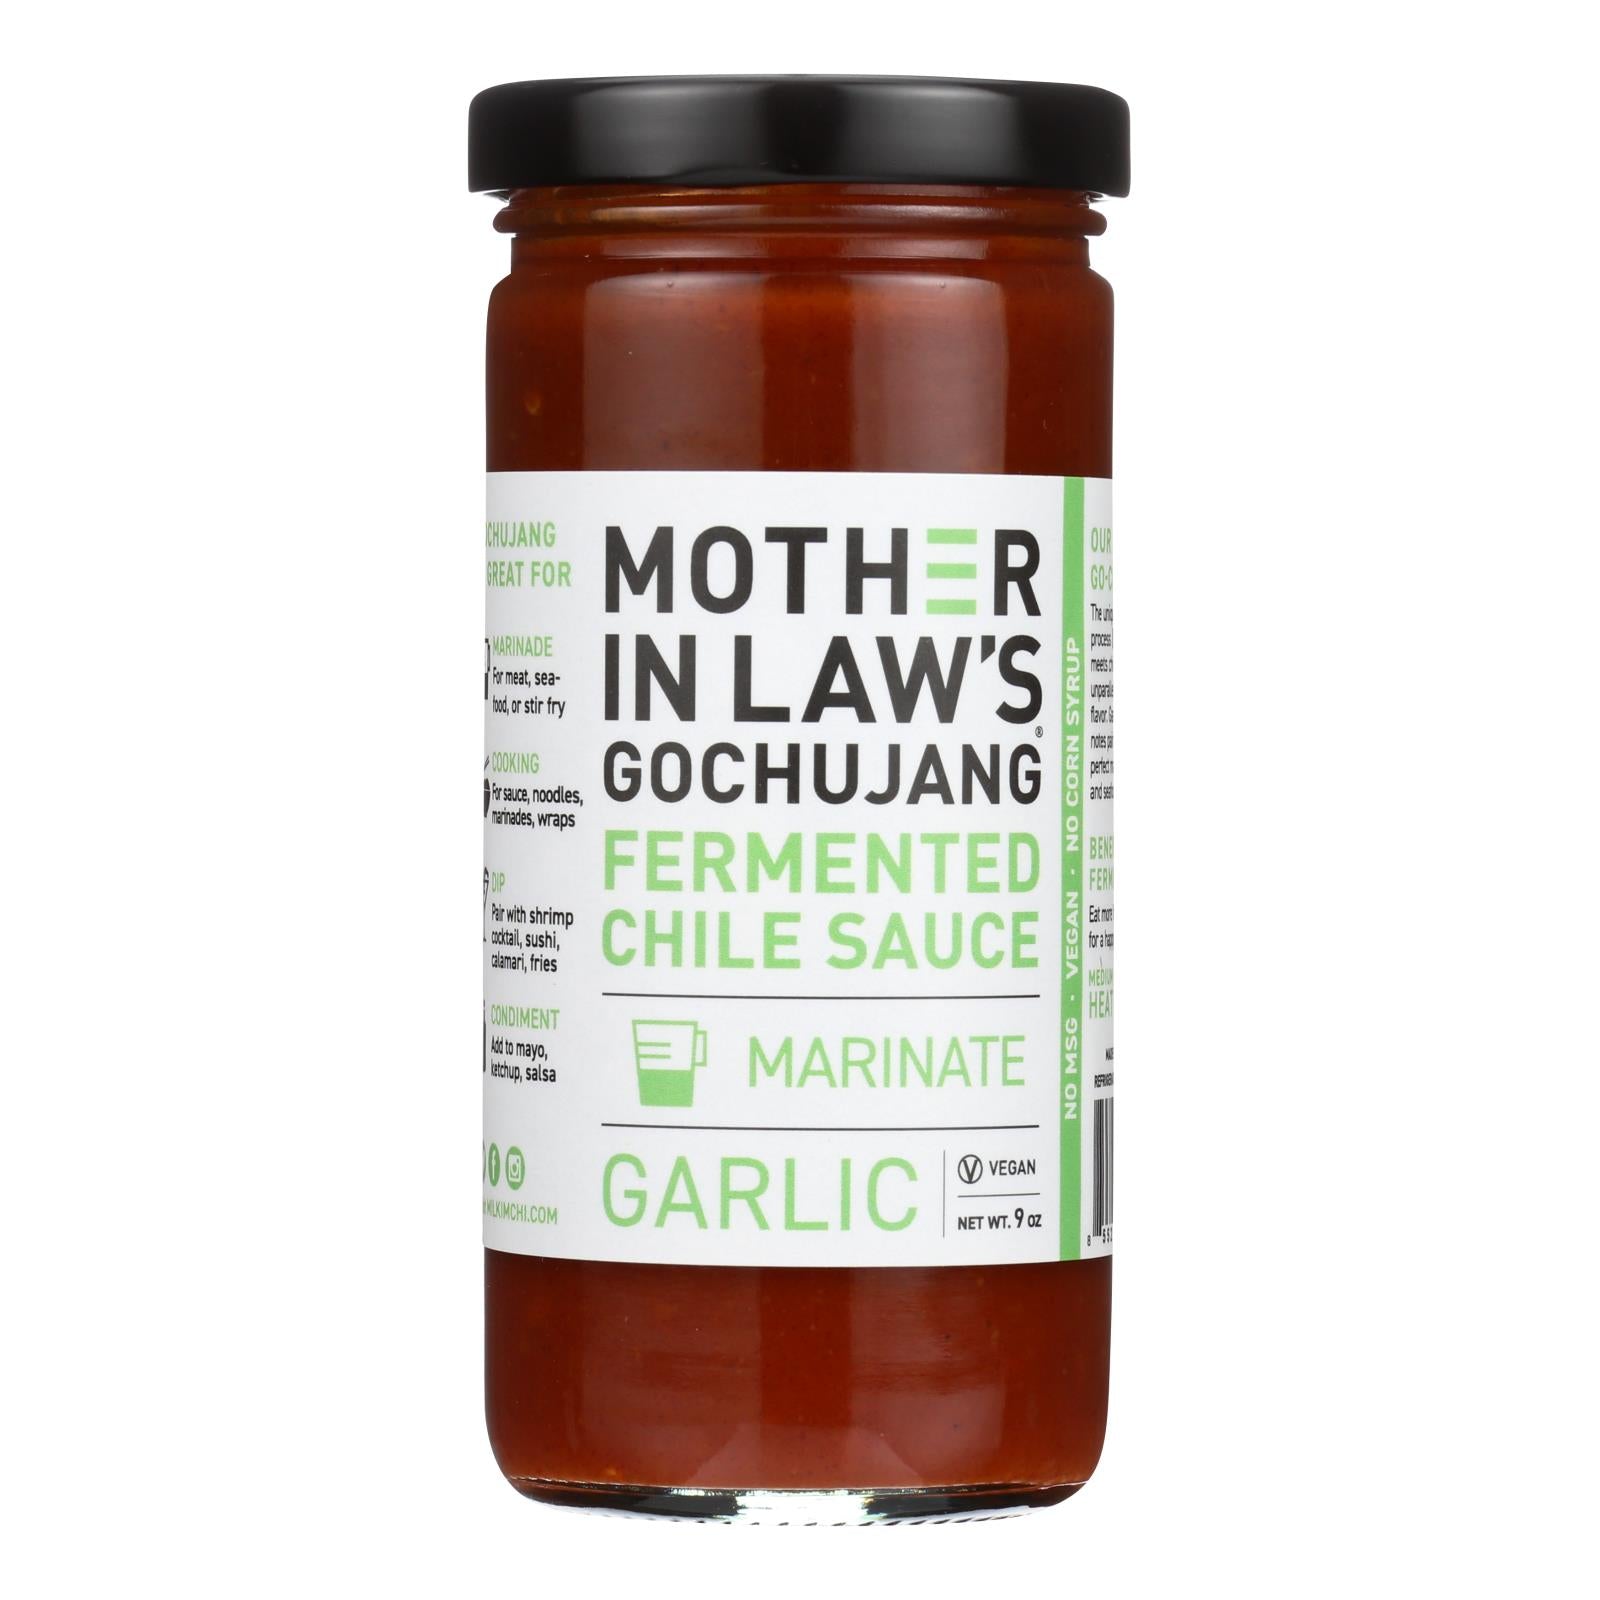 Mother-in-law's Kimchi - Chile Sce Gchjng Garlic - Cs Of 6-9 Oz